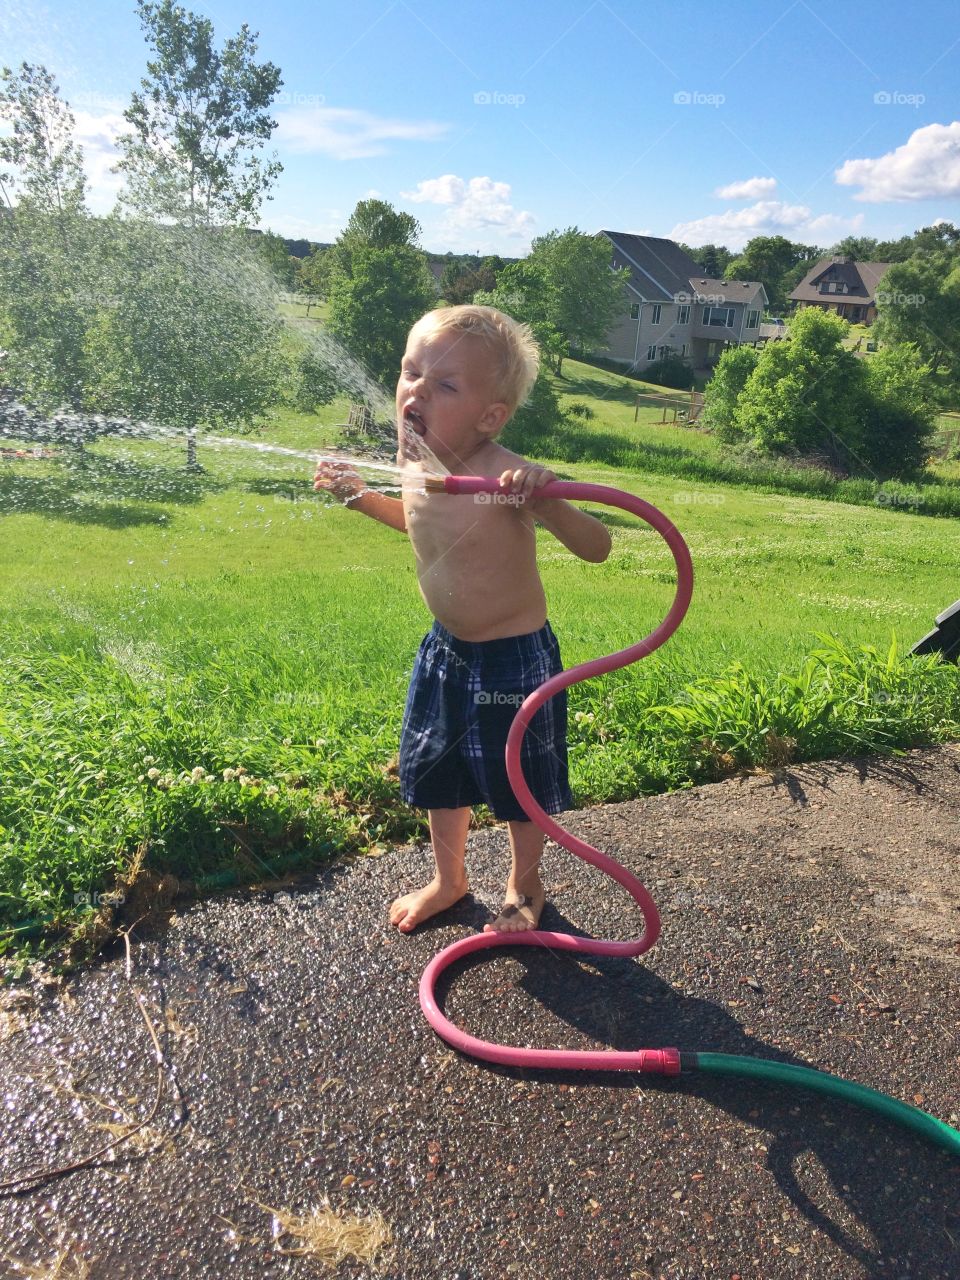 Little cute child boy playing with a rubber hose in the garden